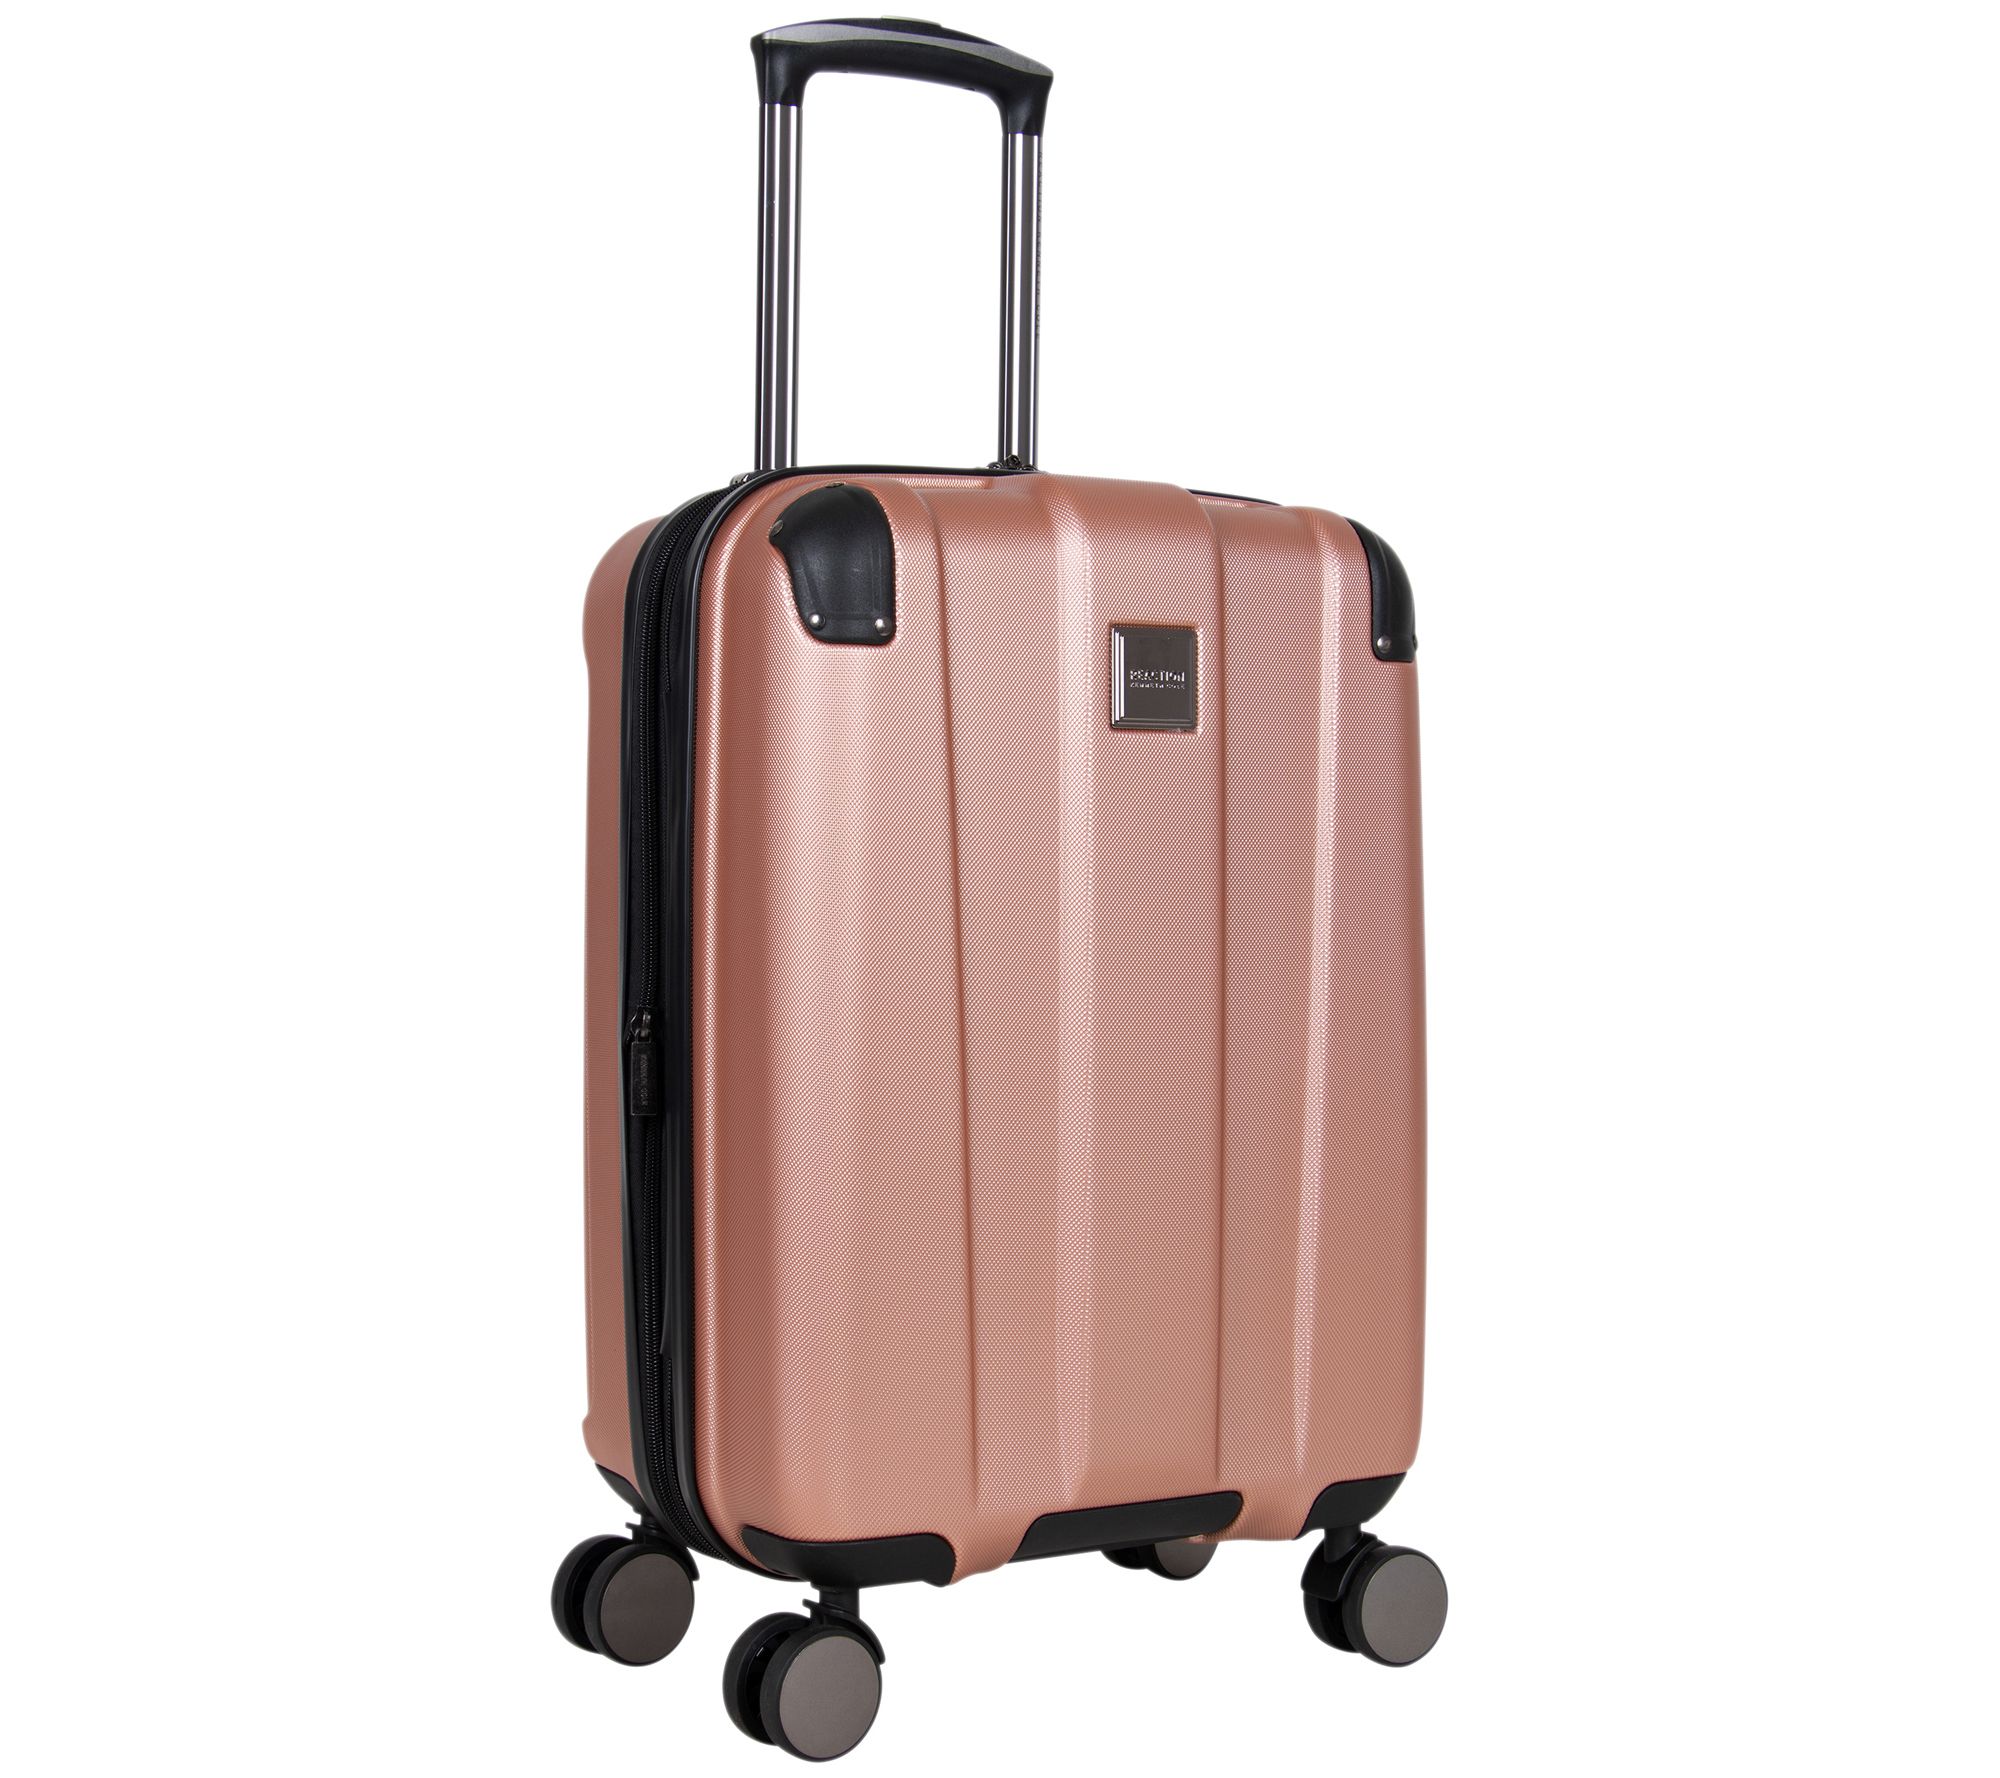 Kenneth Cole Reaction Continuum 20" Hardside Carry-On Luggage - QVC.com